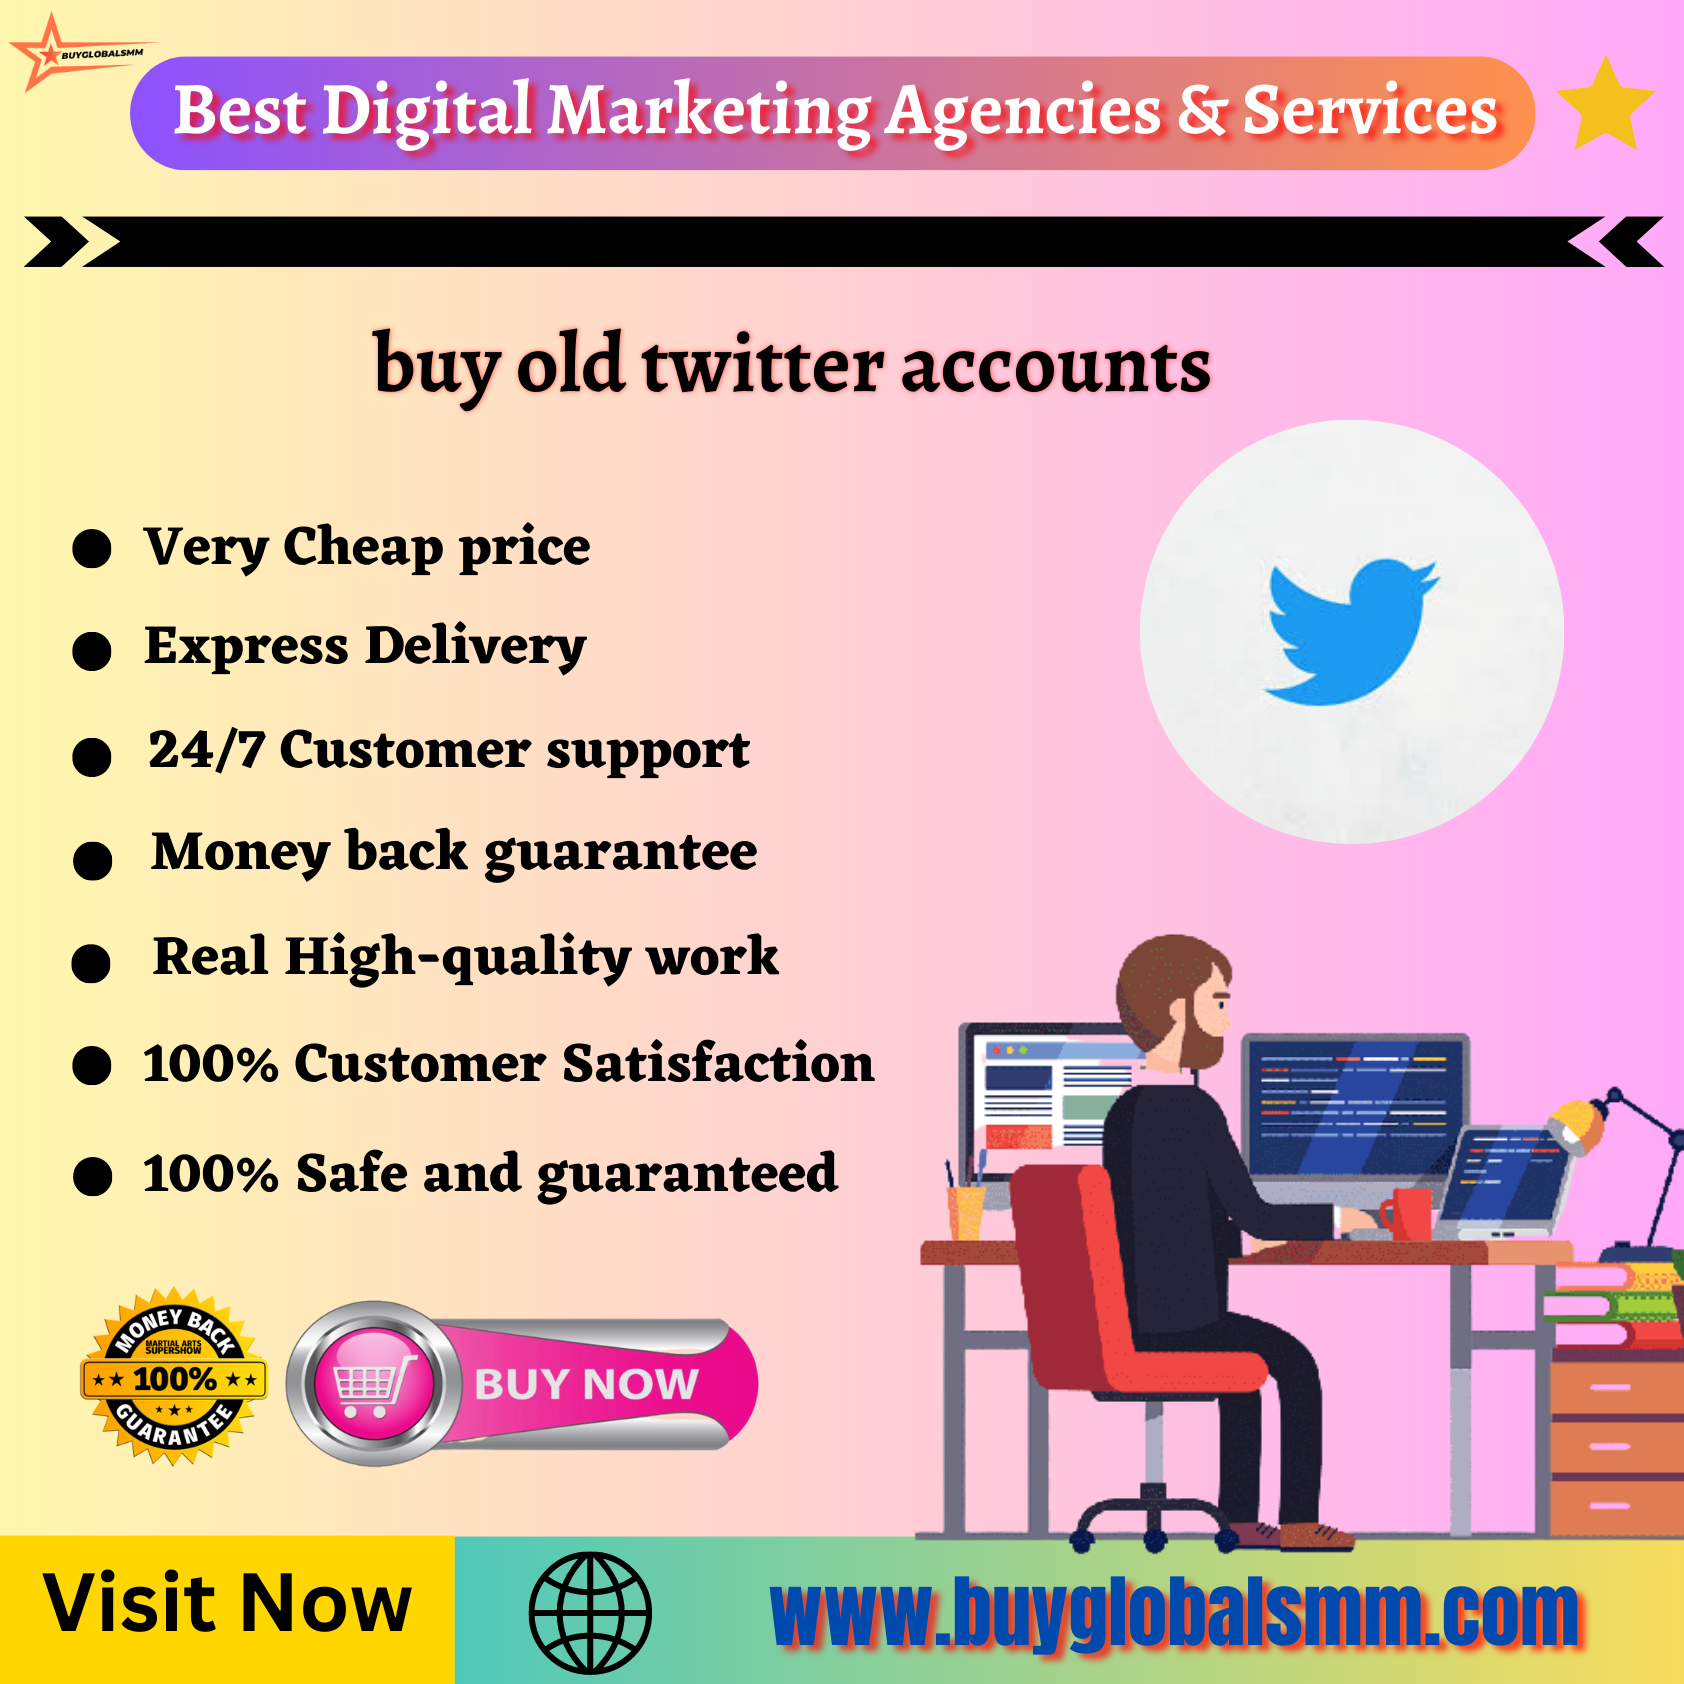 buy old twitter accounts-100% full verified account...